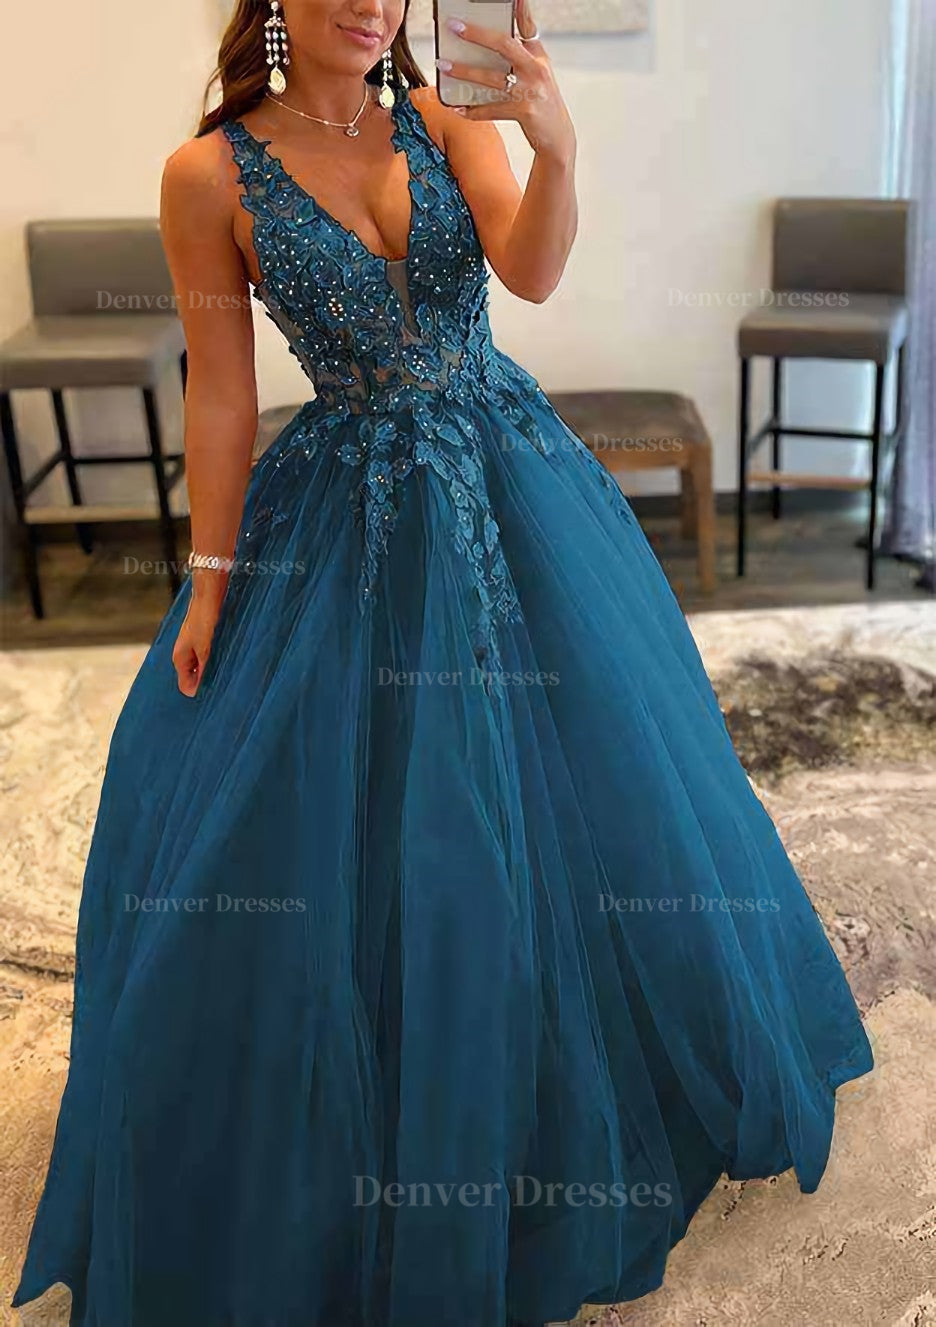 Bridesmaids Dresses On Sale, Princess A-line V Neck Sleeveless Sweep Train Tulle Prom Dress With Appliqued Beading